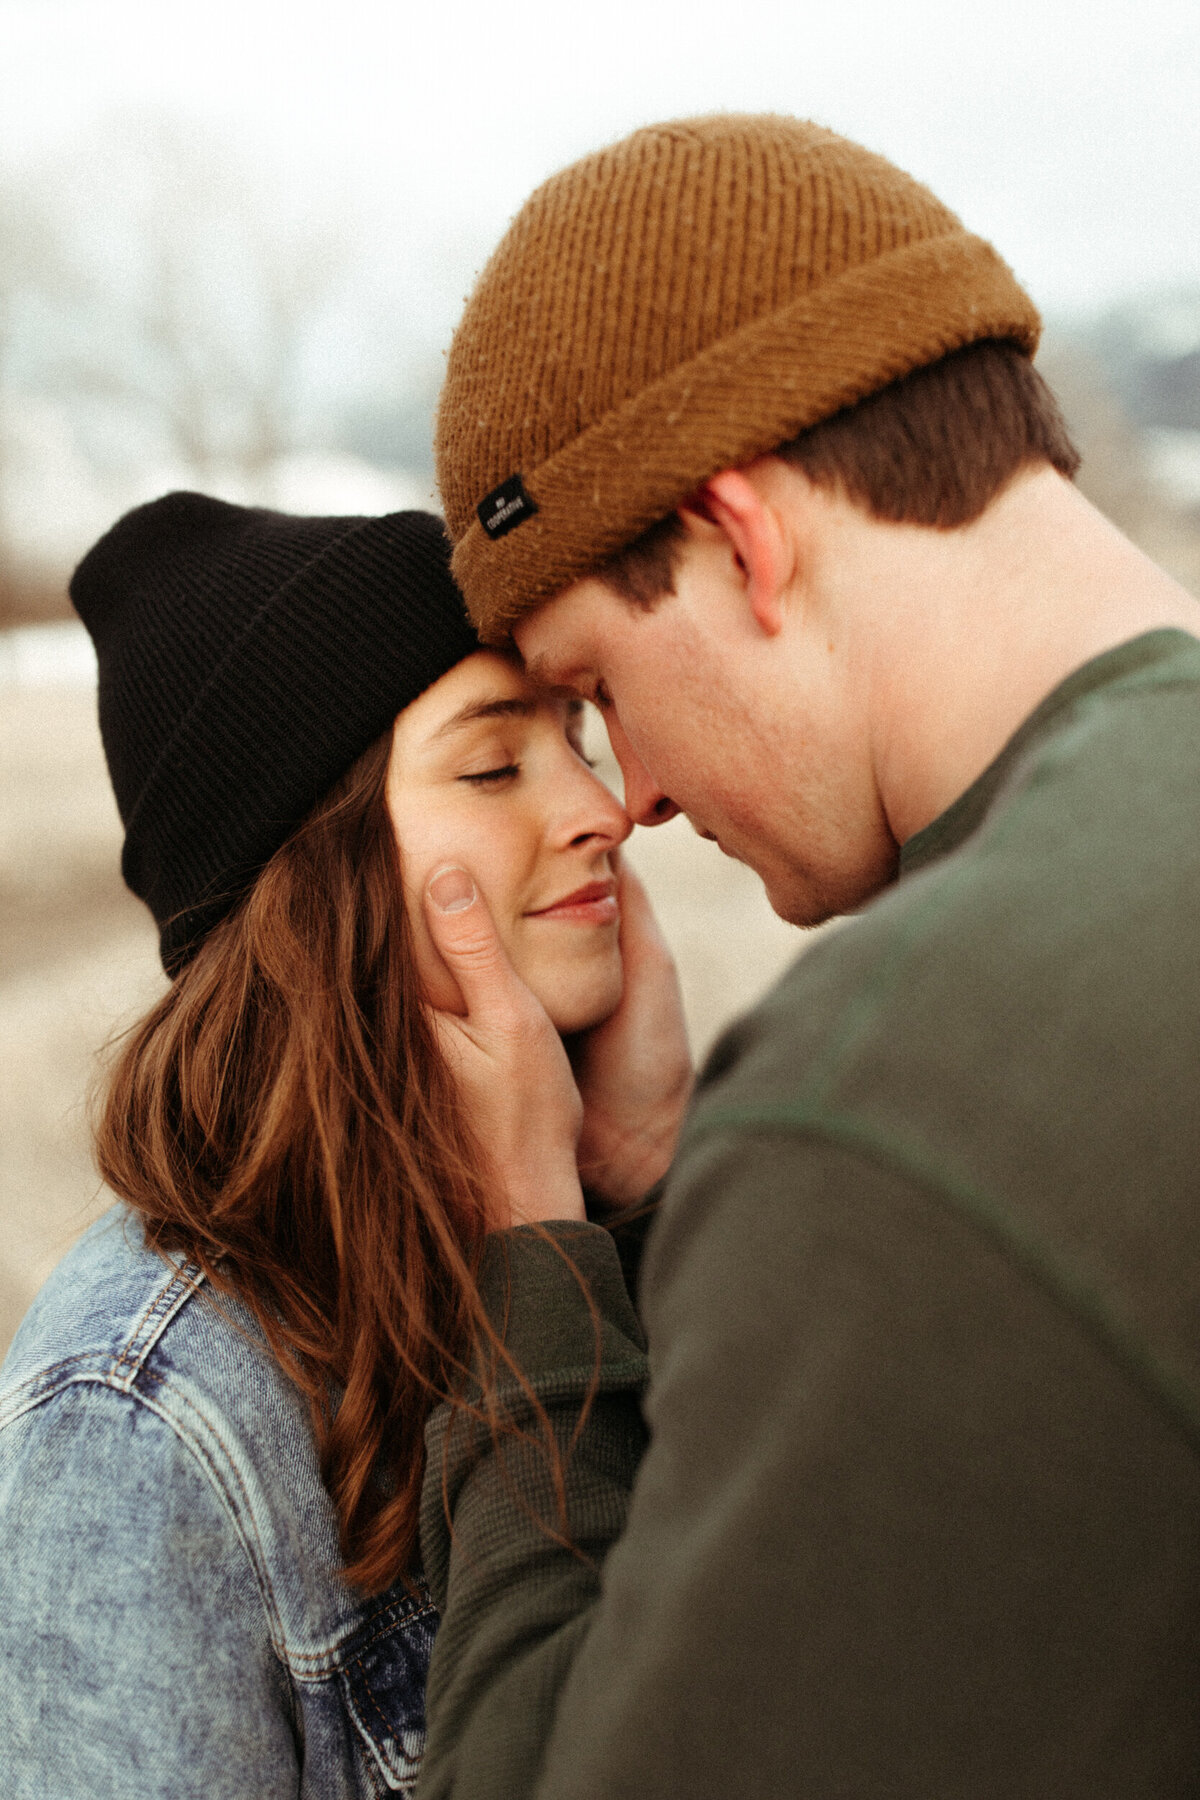 Couple wearing beanies holding each other close